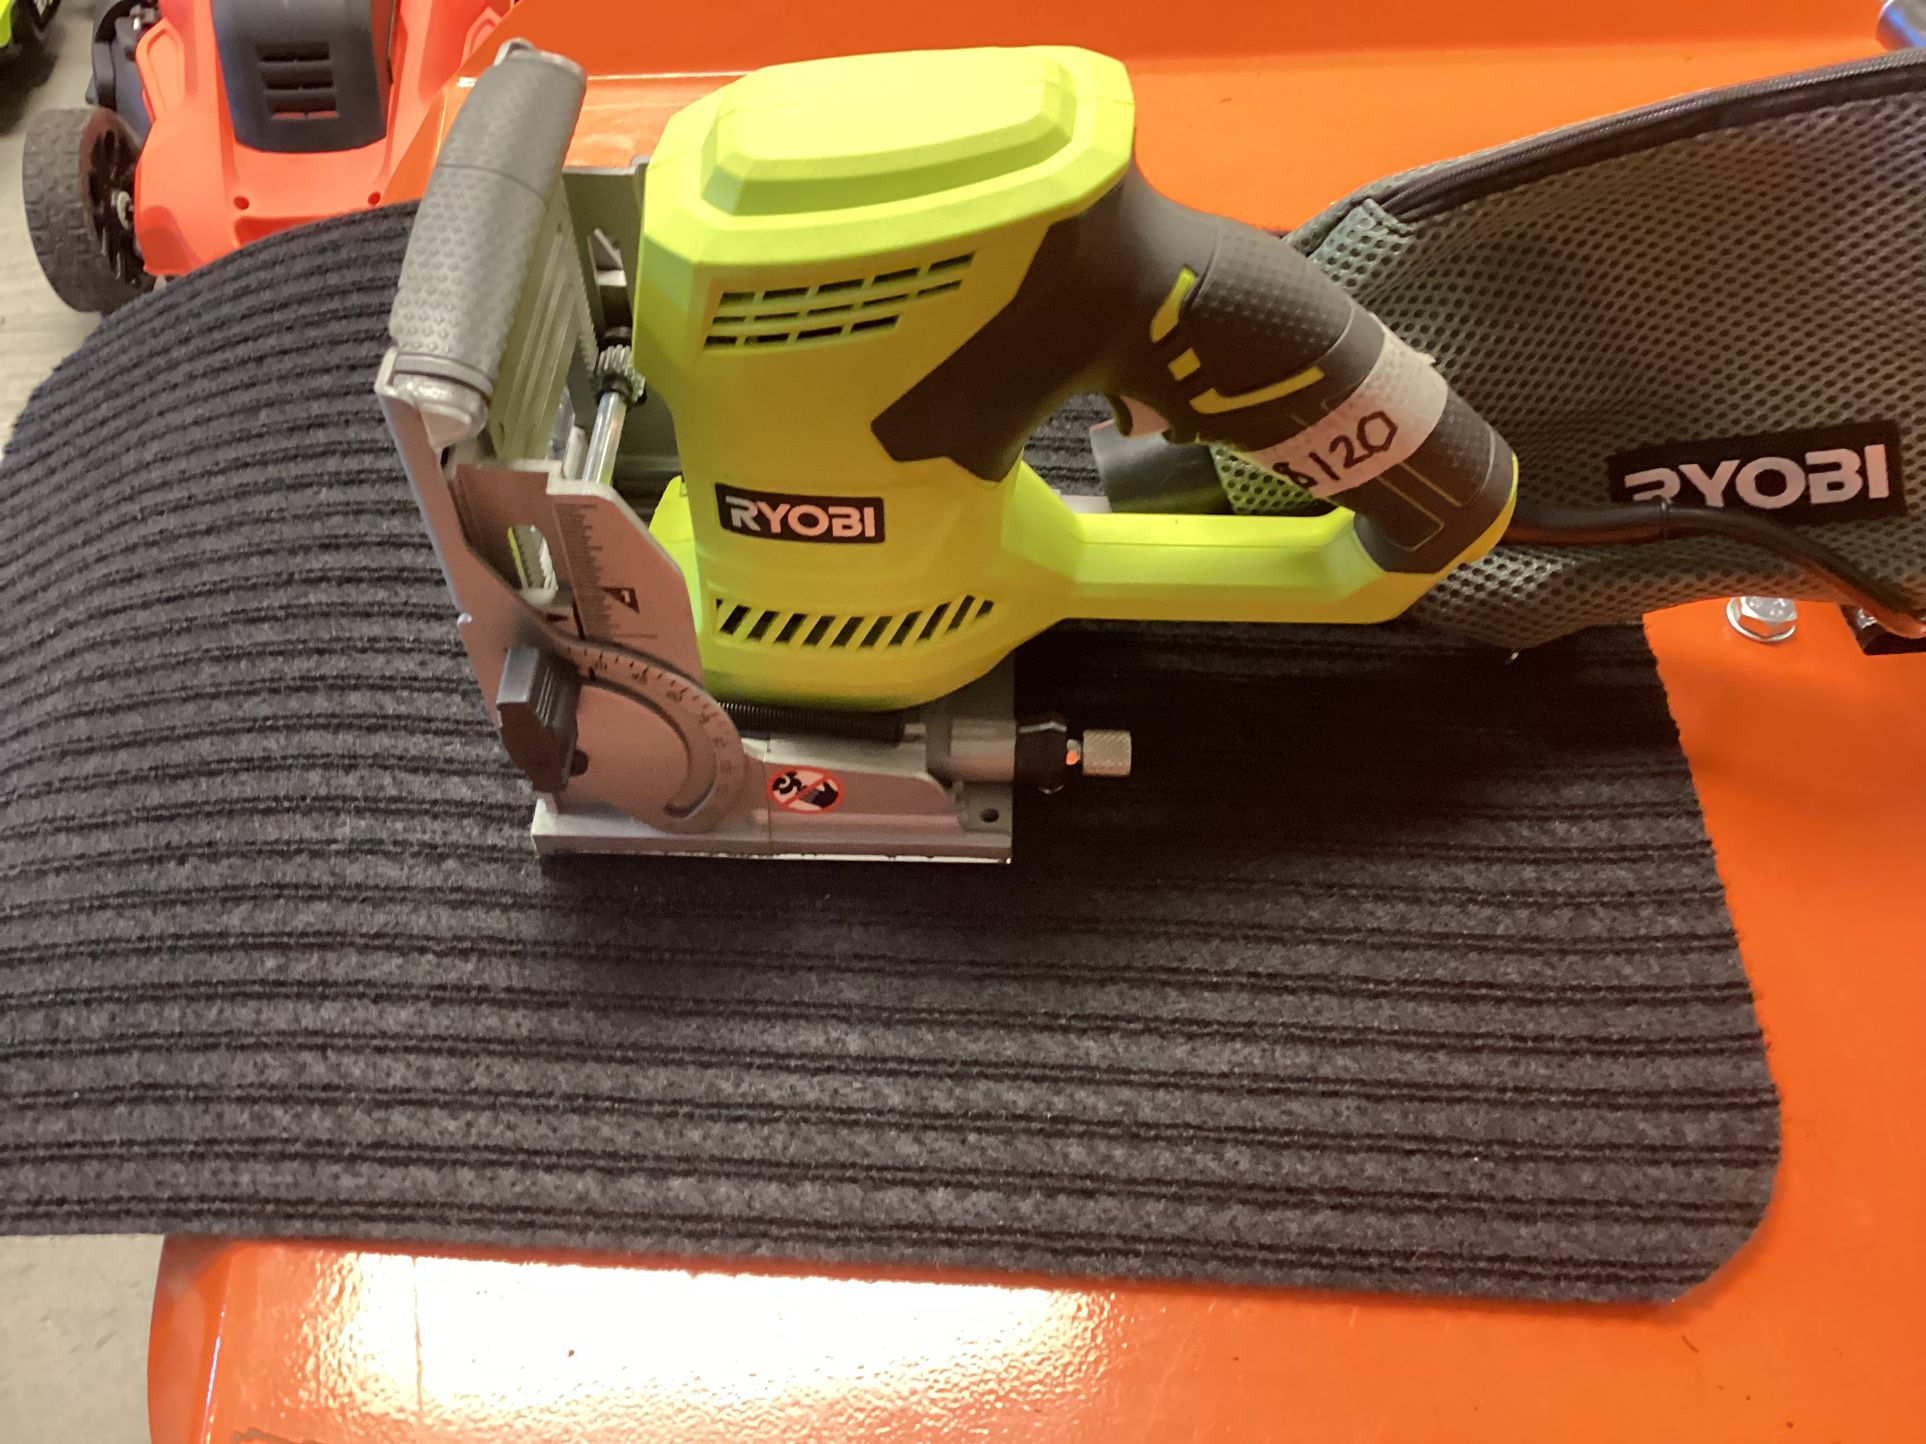 RYOBI Amp AC Biscuit Joiner Kit with Dust Collector and Bag $80 for Sale  in Albuquerque, NM OfferUp